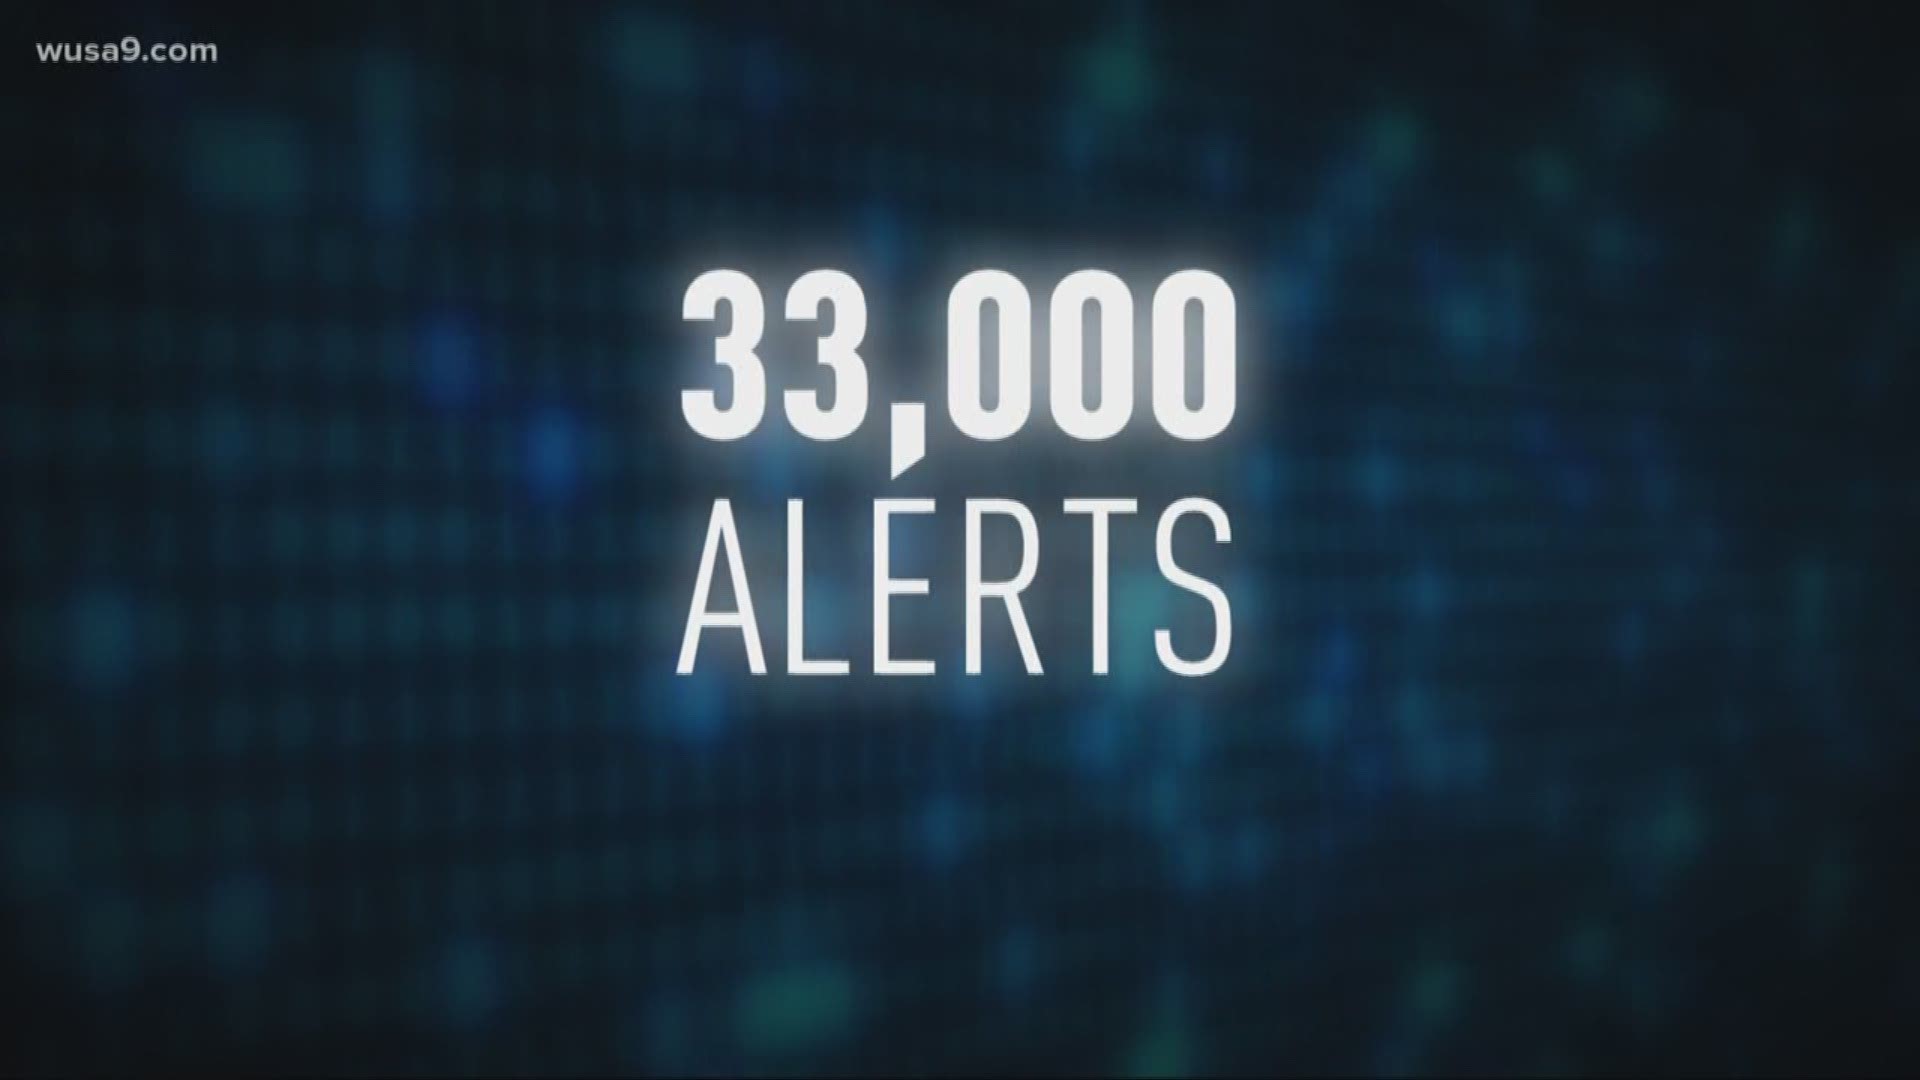 Nationwide, more than 33,000 Wireless Emergency Alerts have been issued since the system started in 2012.